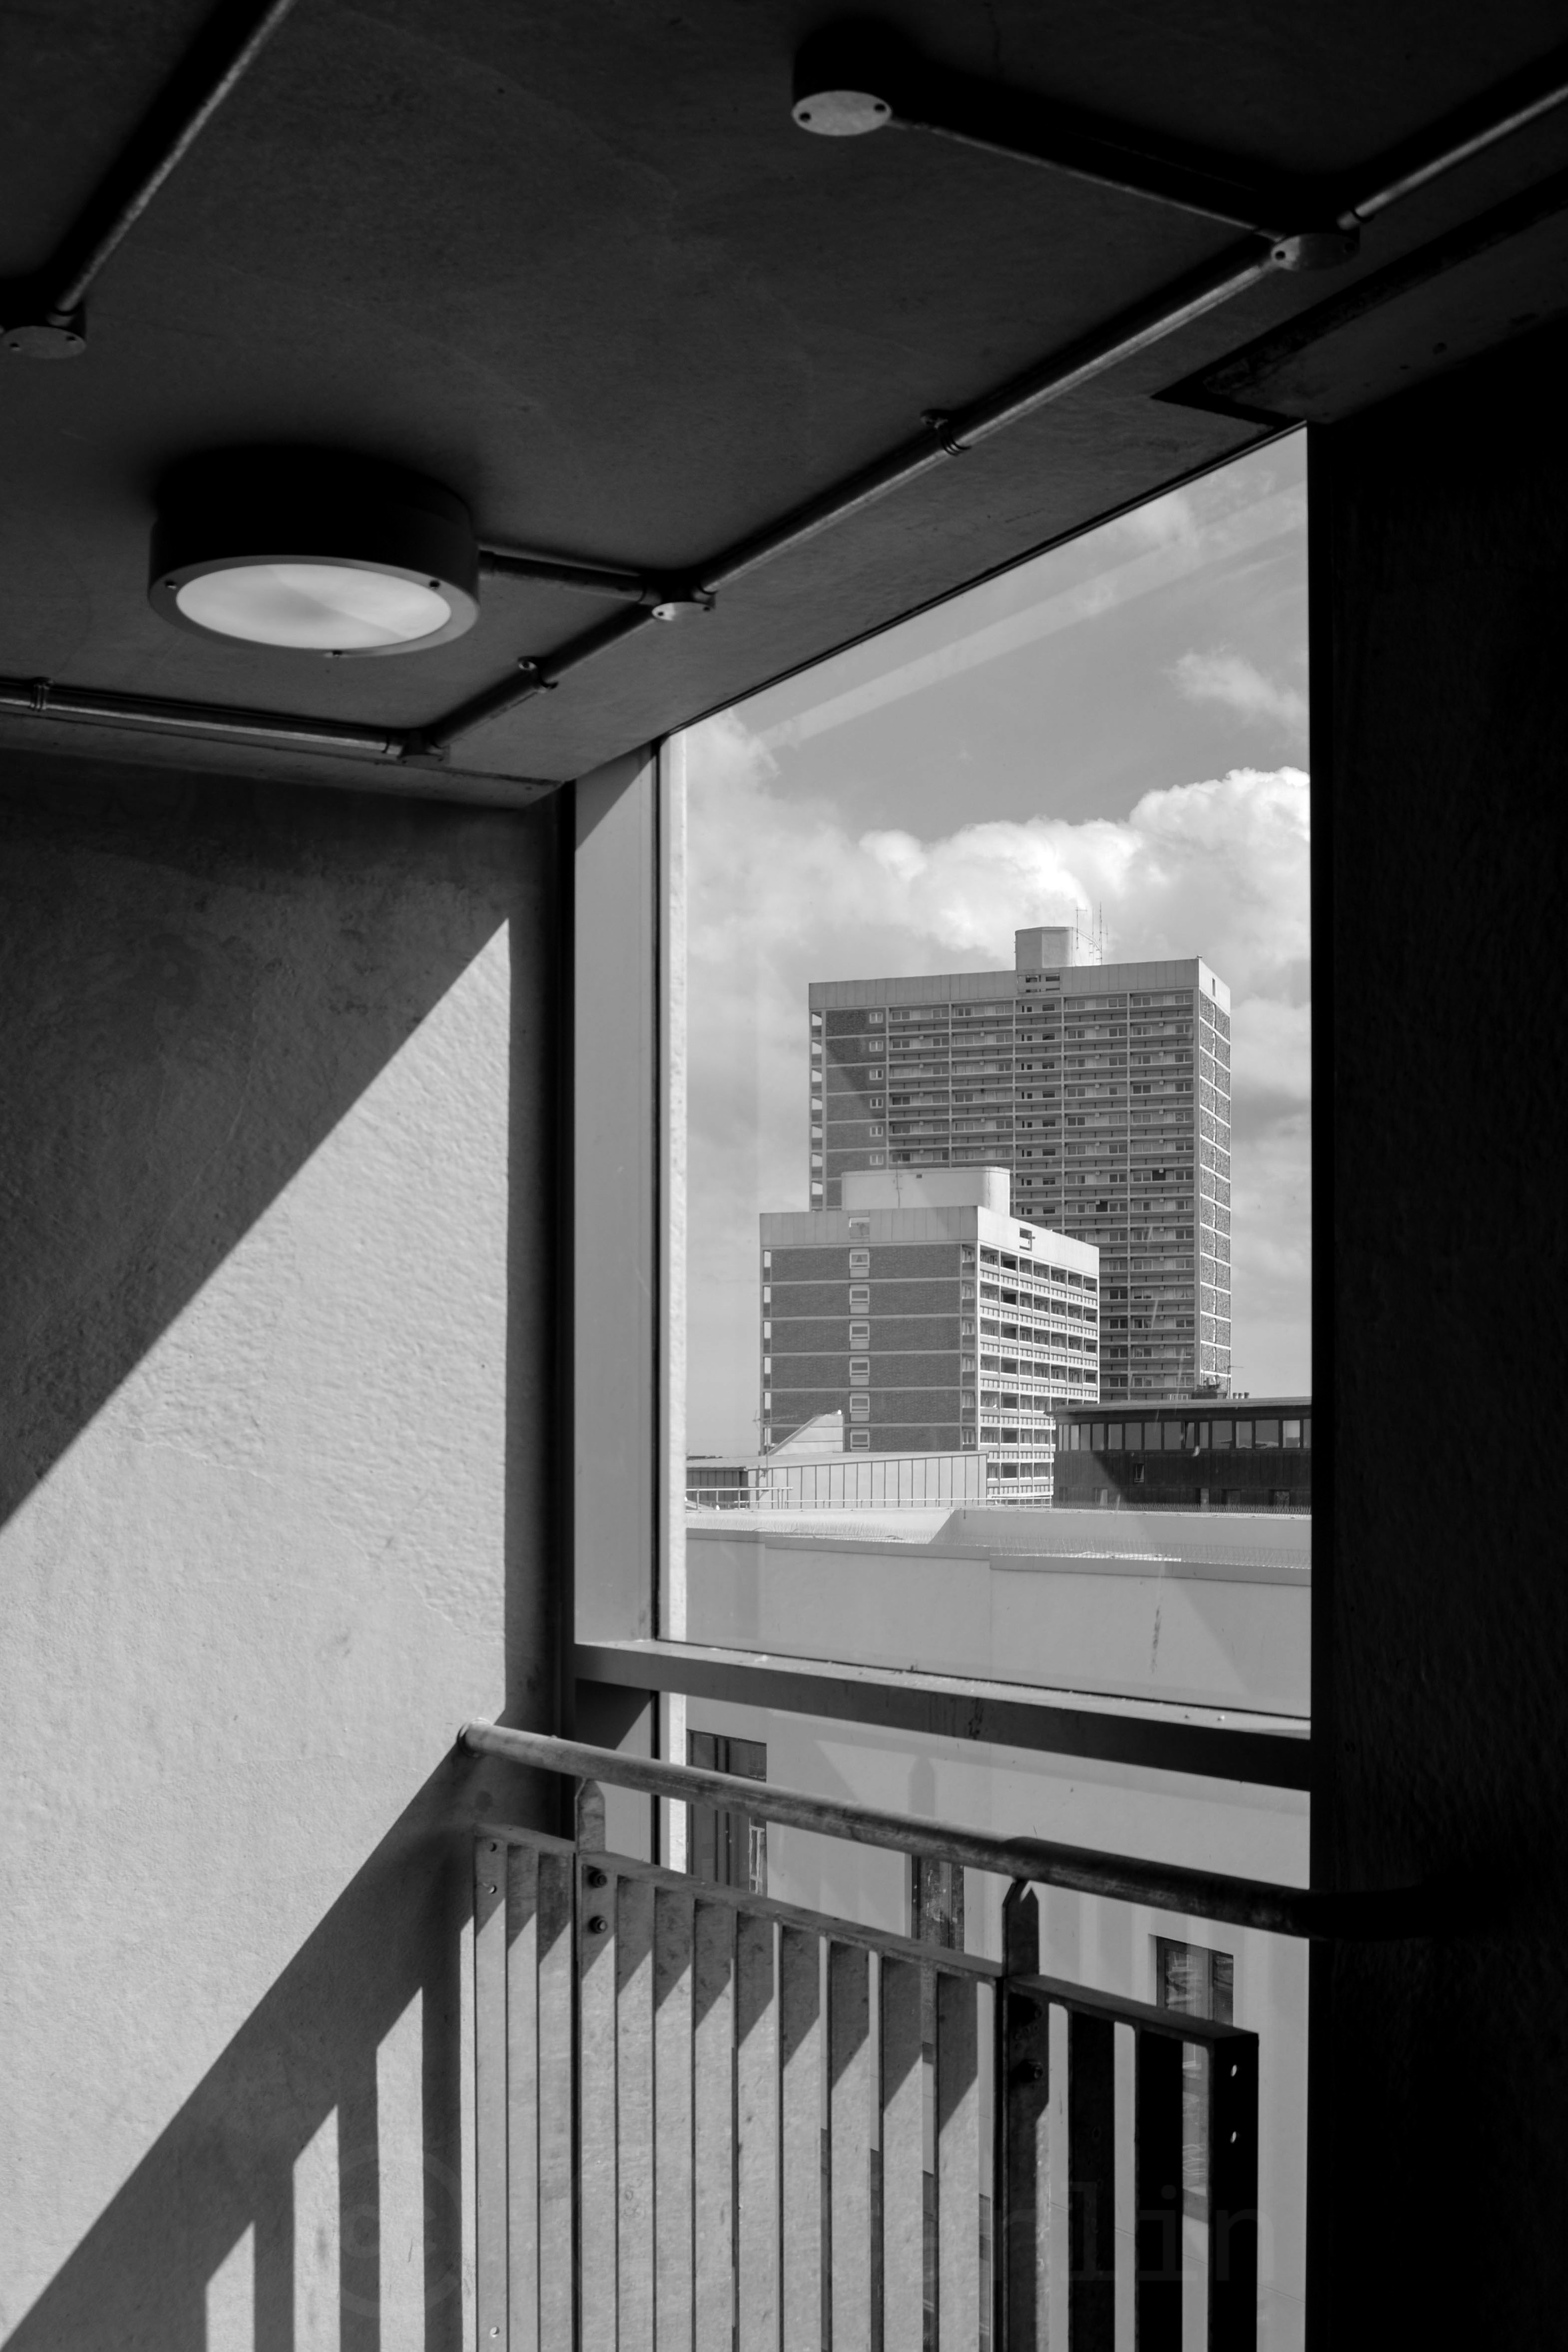 A high rise building framed in a window